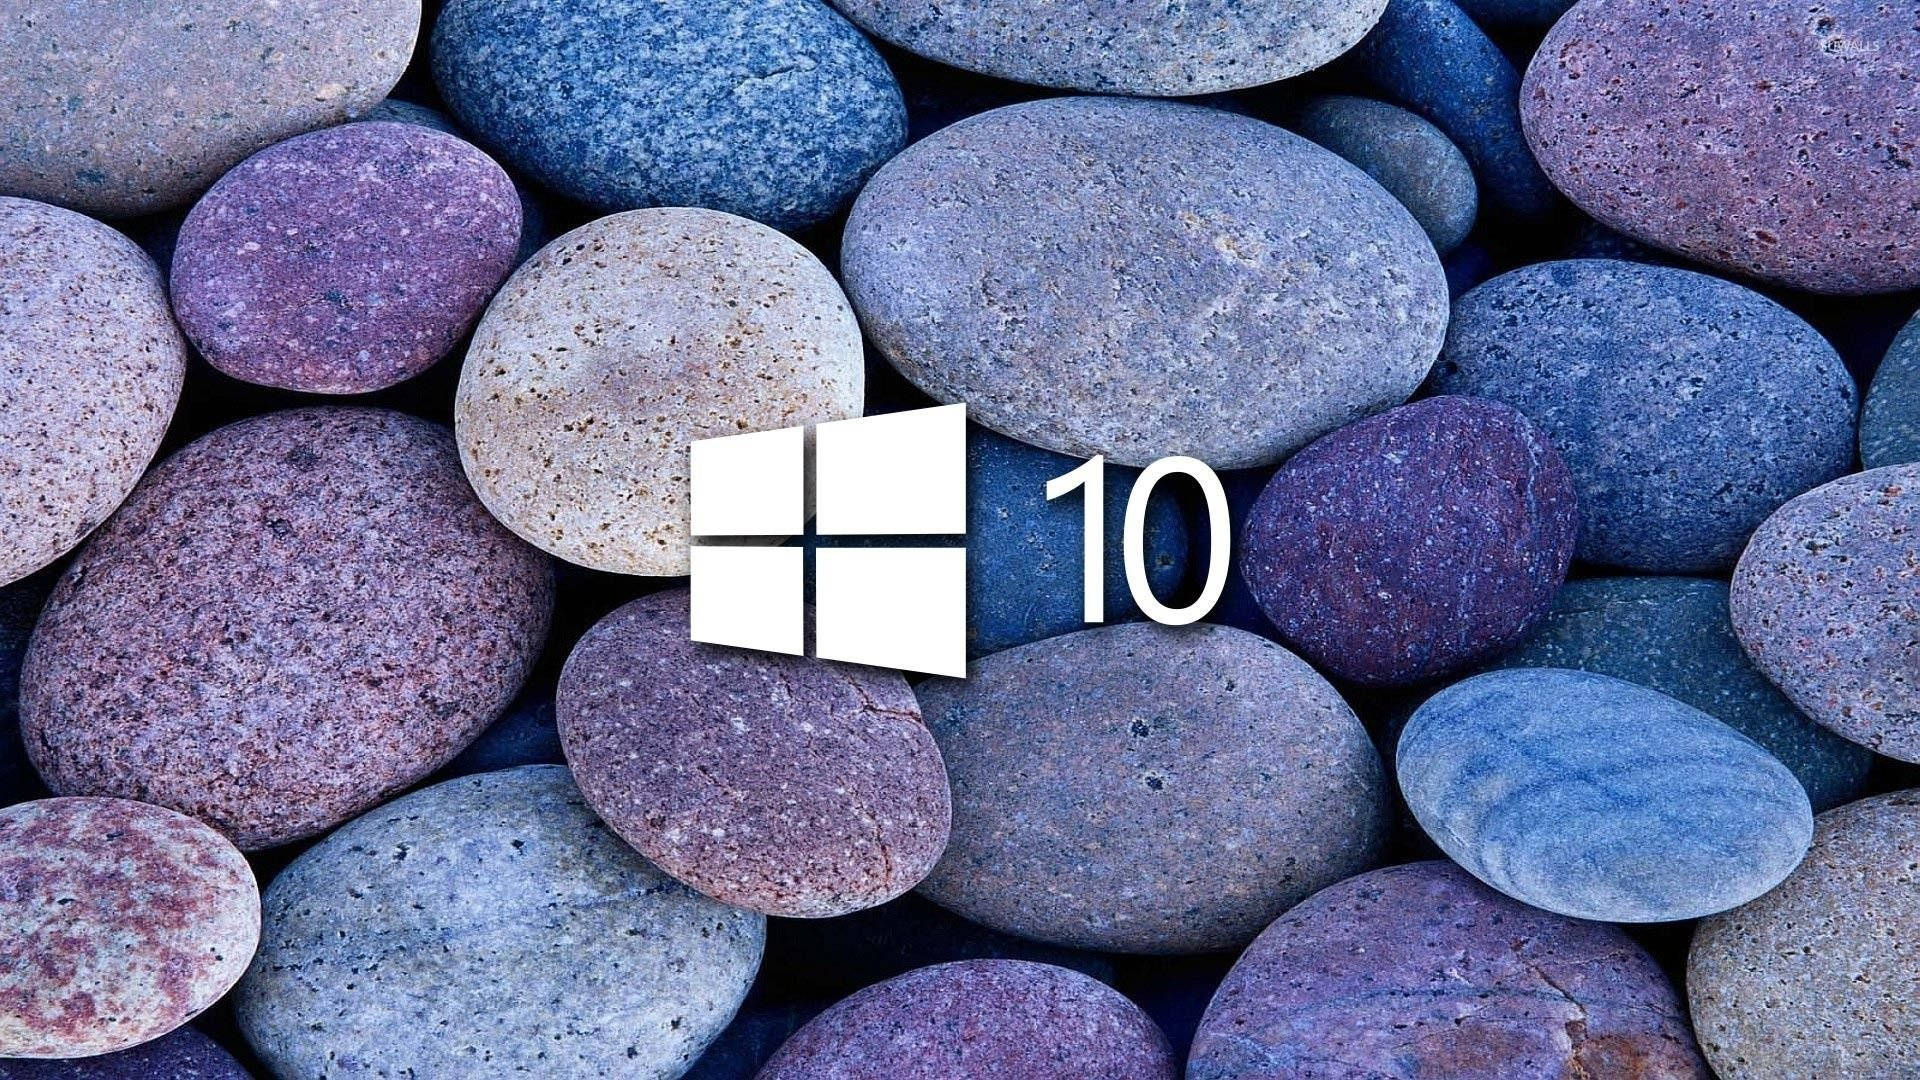 Windows 10 Hd Pictures Wallpaper